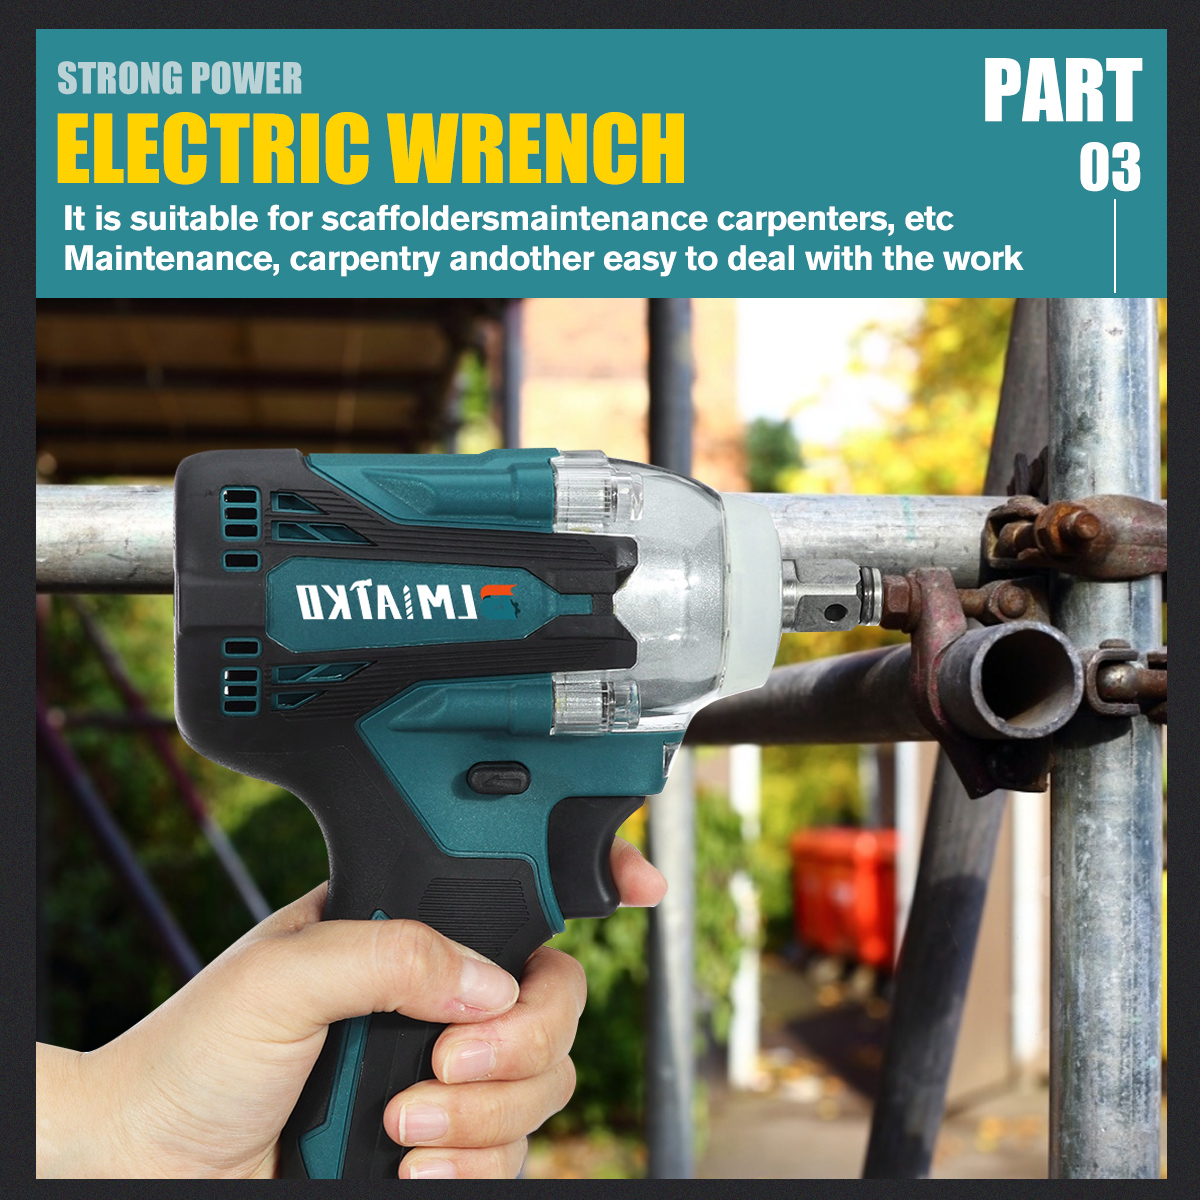 4-Speed-Brushless-Cordless-Electric-Impact-Wrench-with-Battery-1200NM-Rechargeable-12inch-Torque-Wre-1843508-3